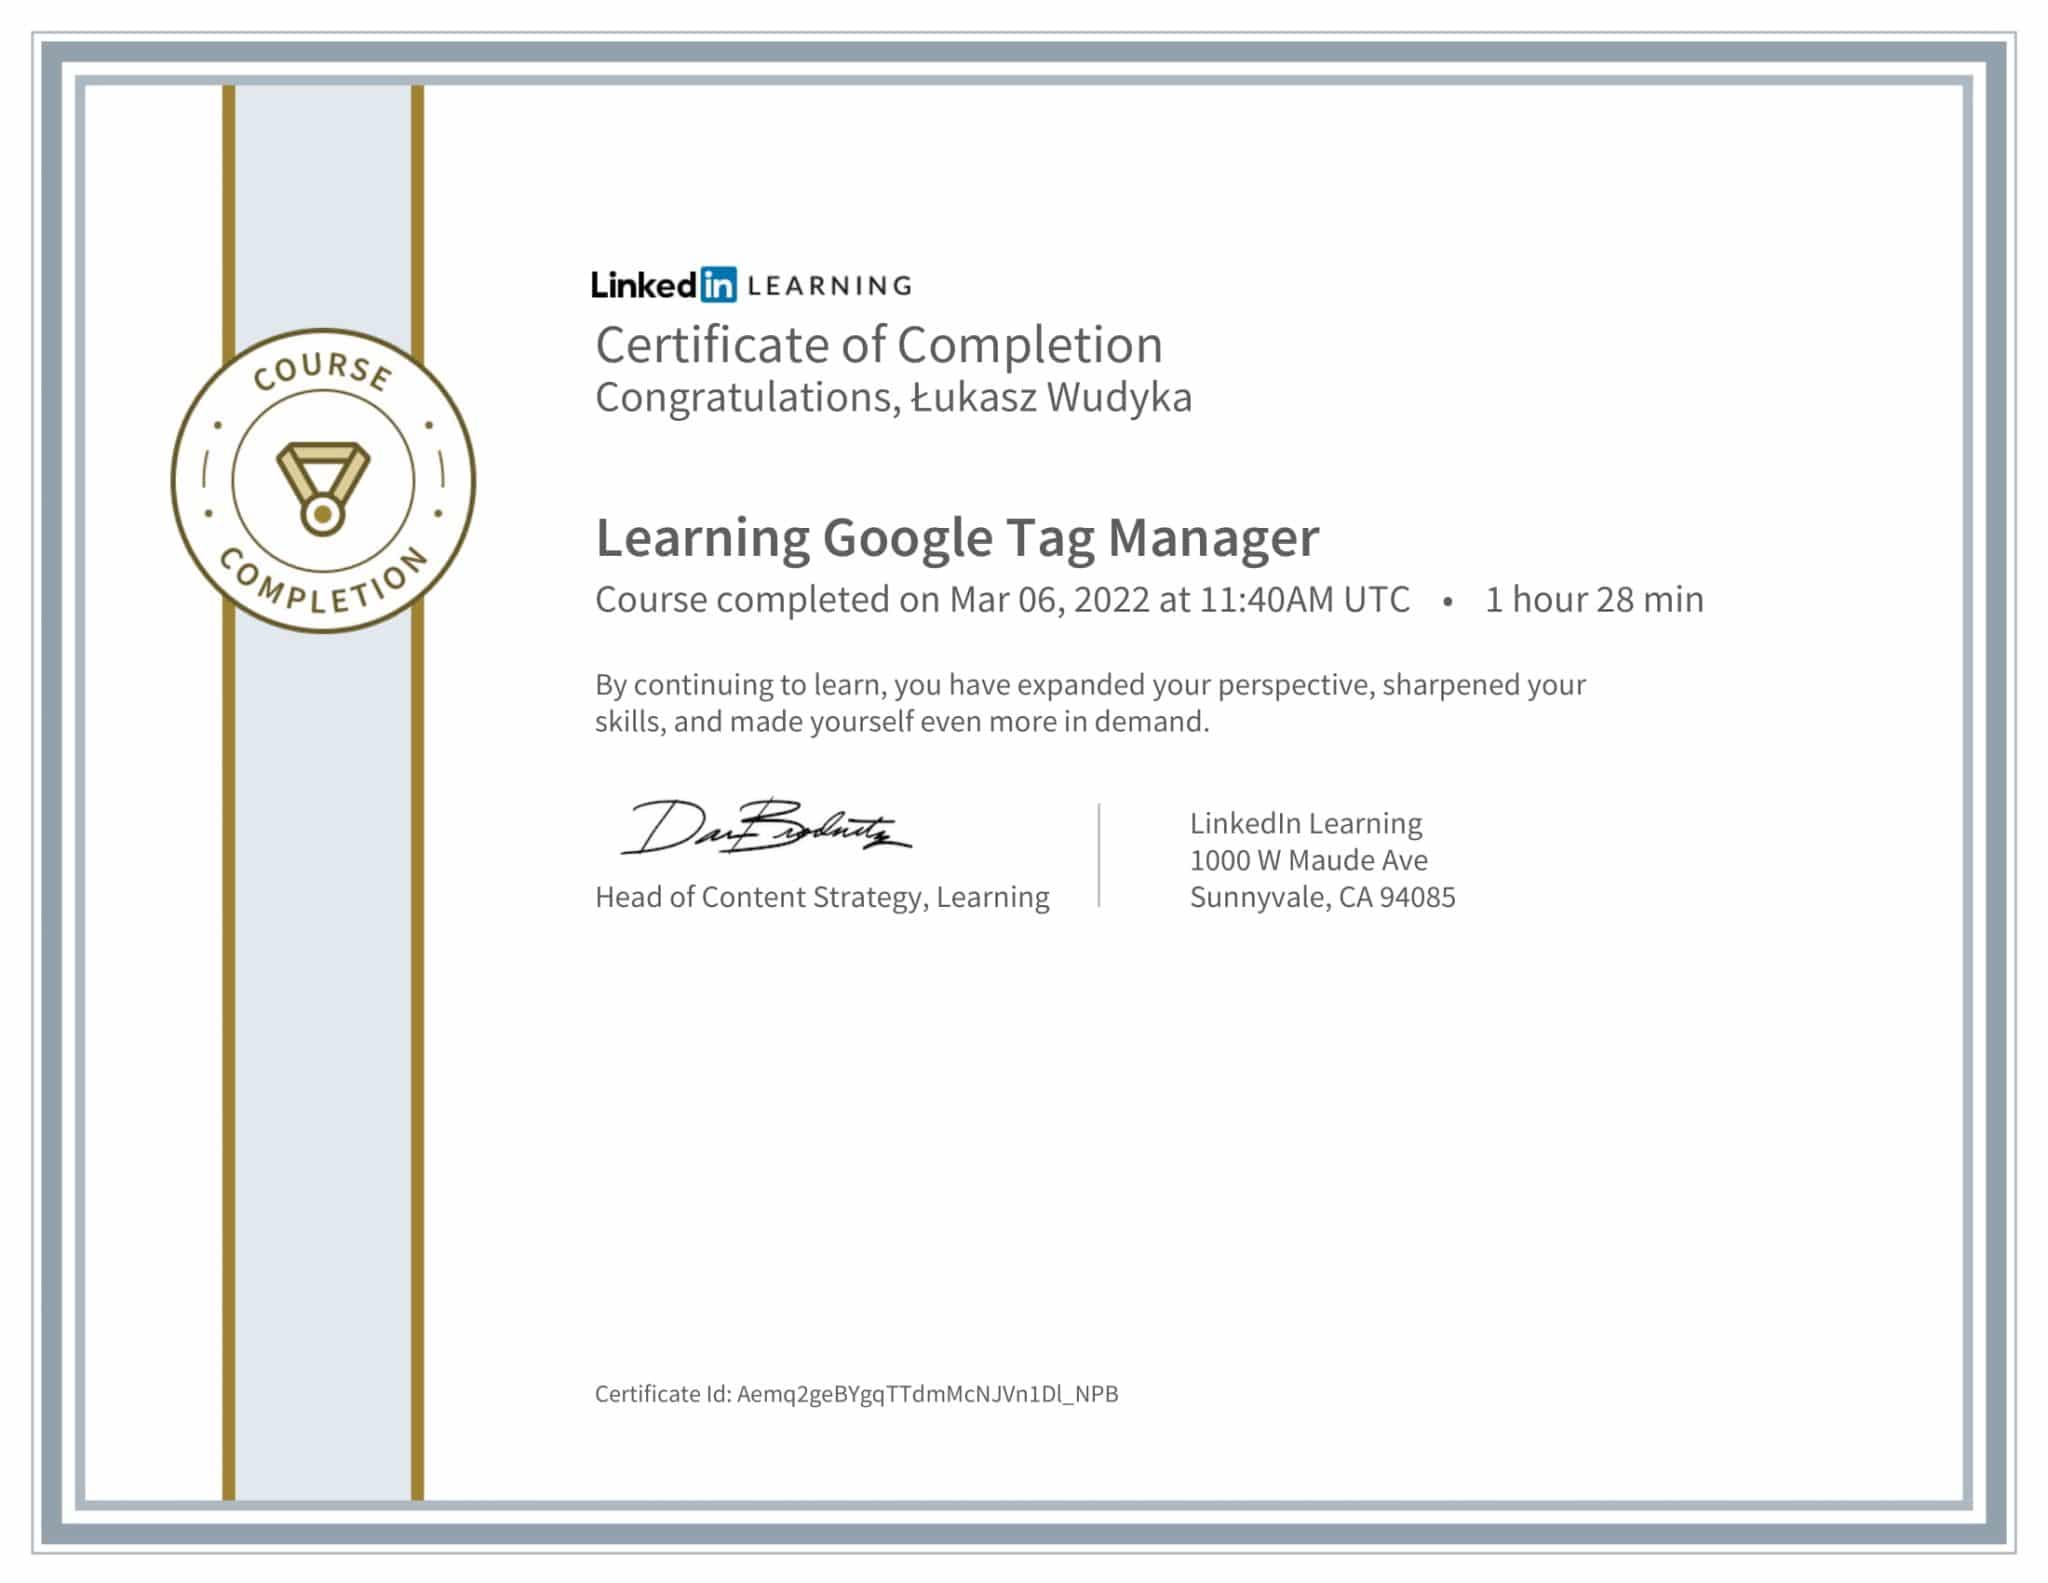 CertificateOfCompletion_Learning Google Tag Manager-1